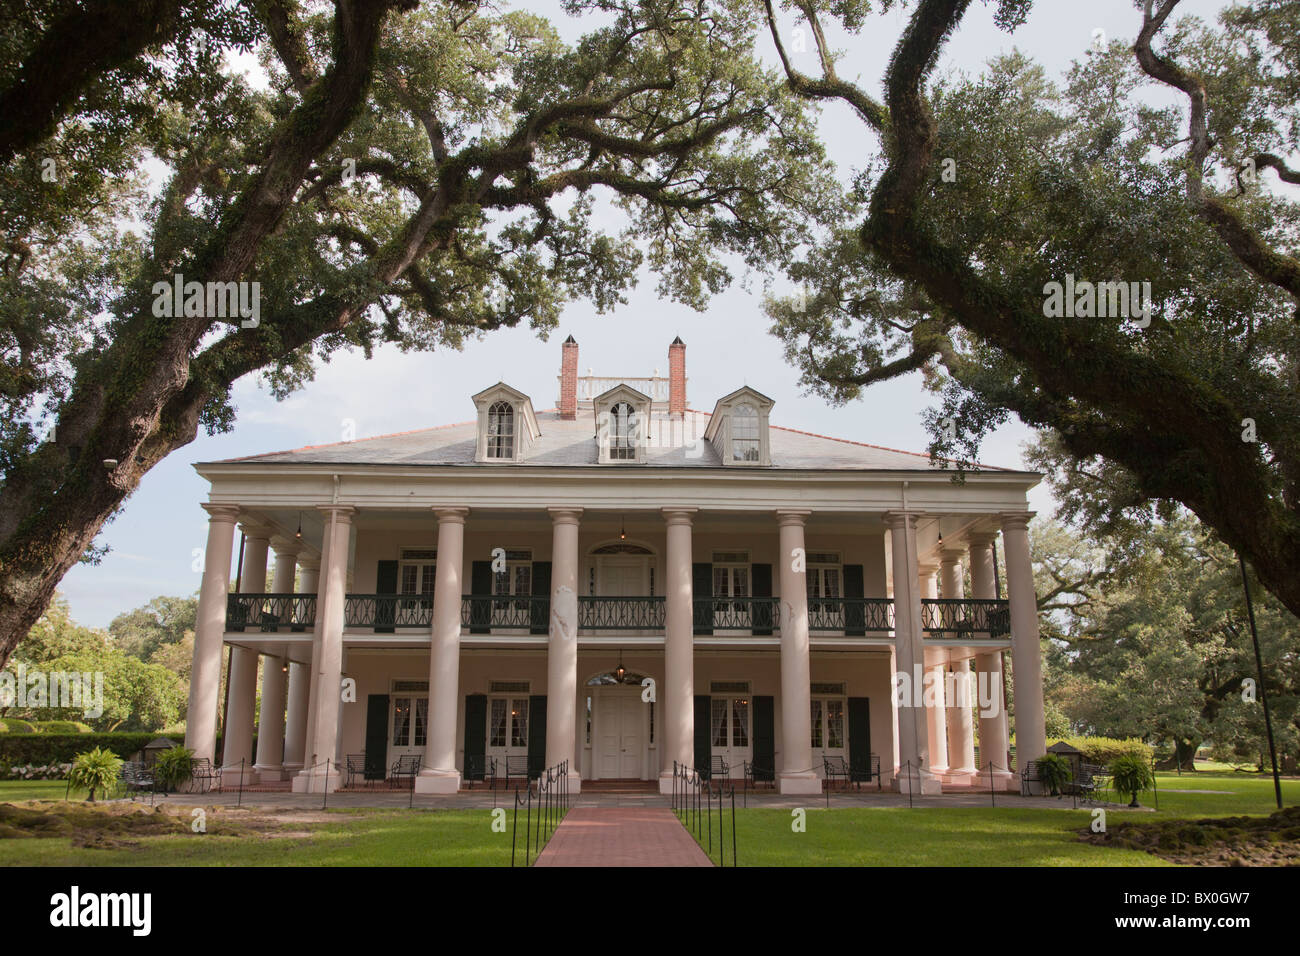 Between New Orleans and Baton Rouge, and on the Mississippi River, lies Oak Alley Plantation, now a historical tour destination. Stock Photo